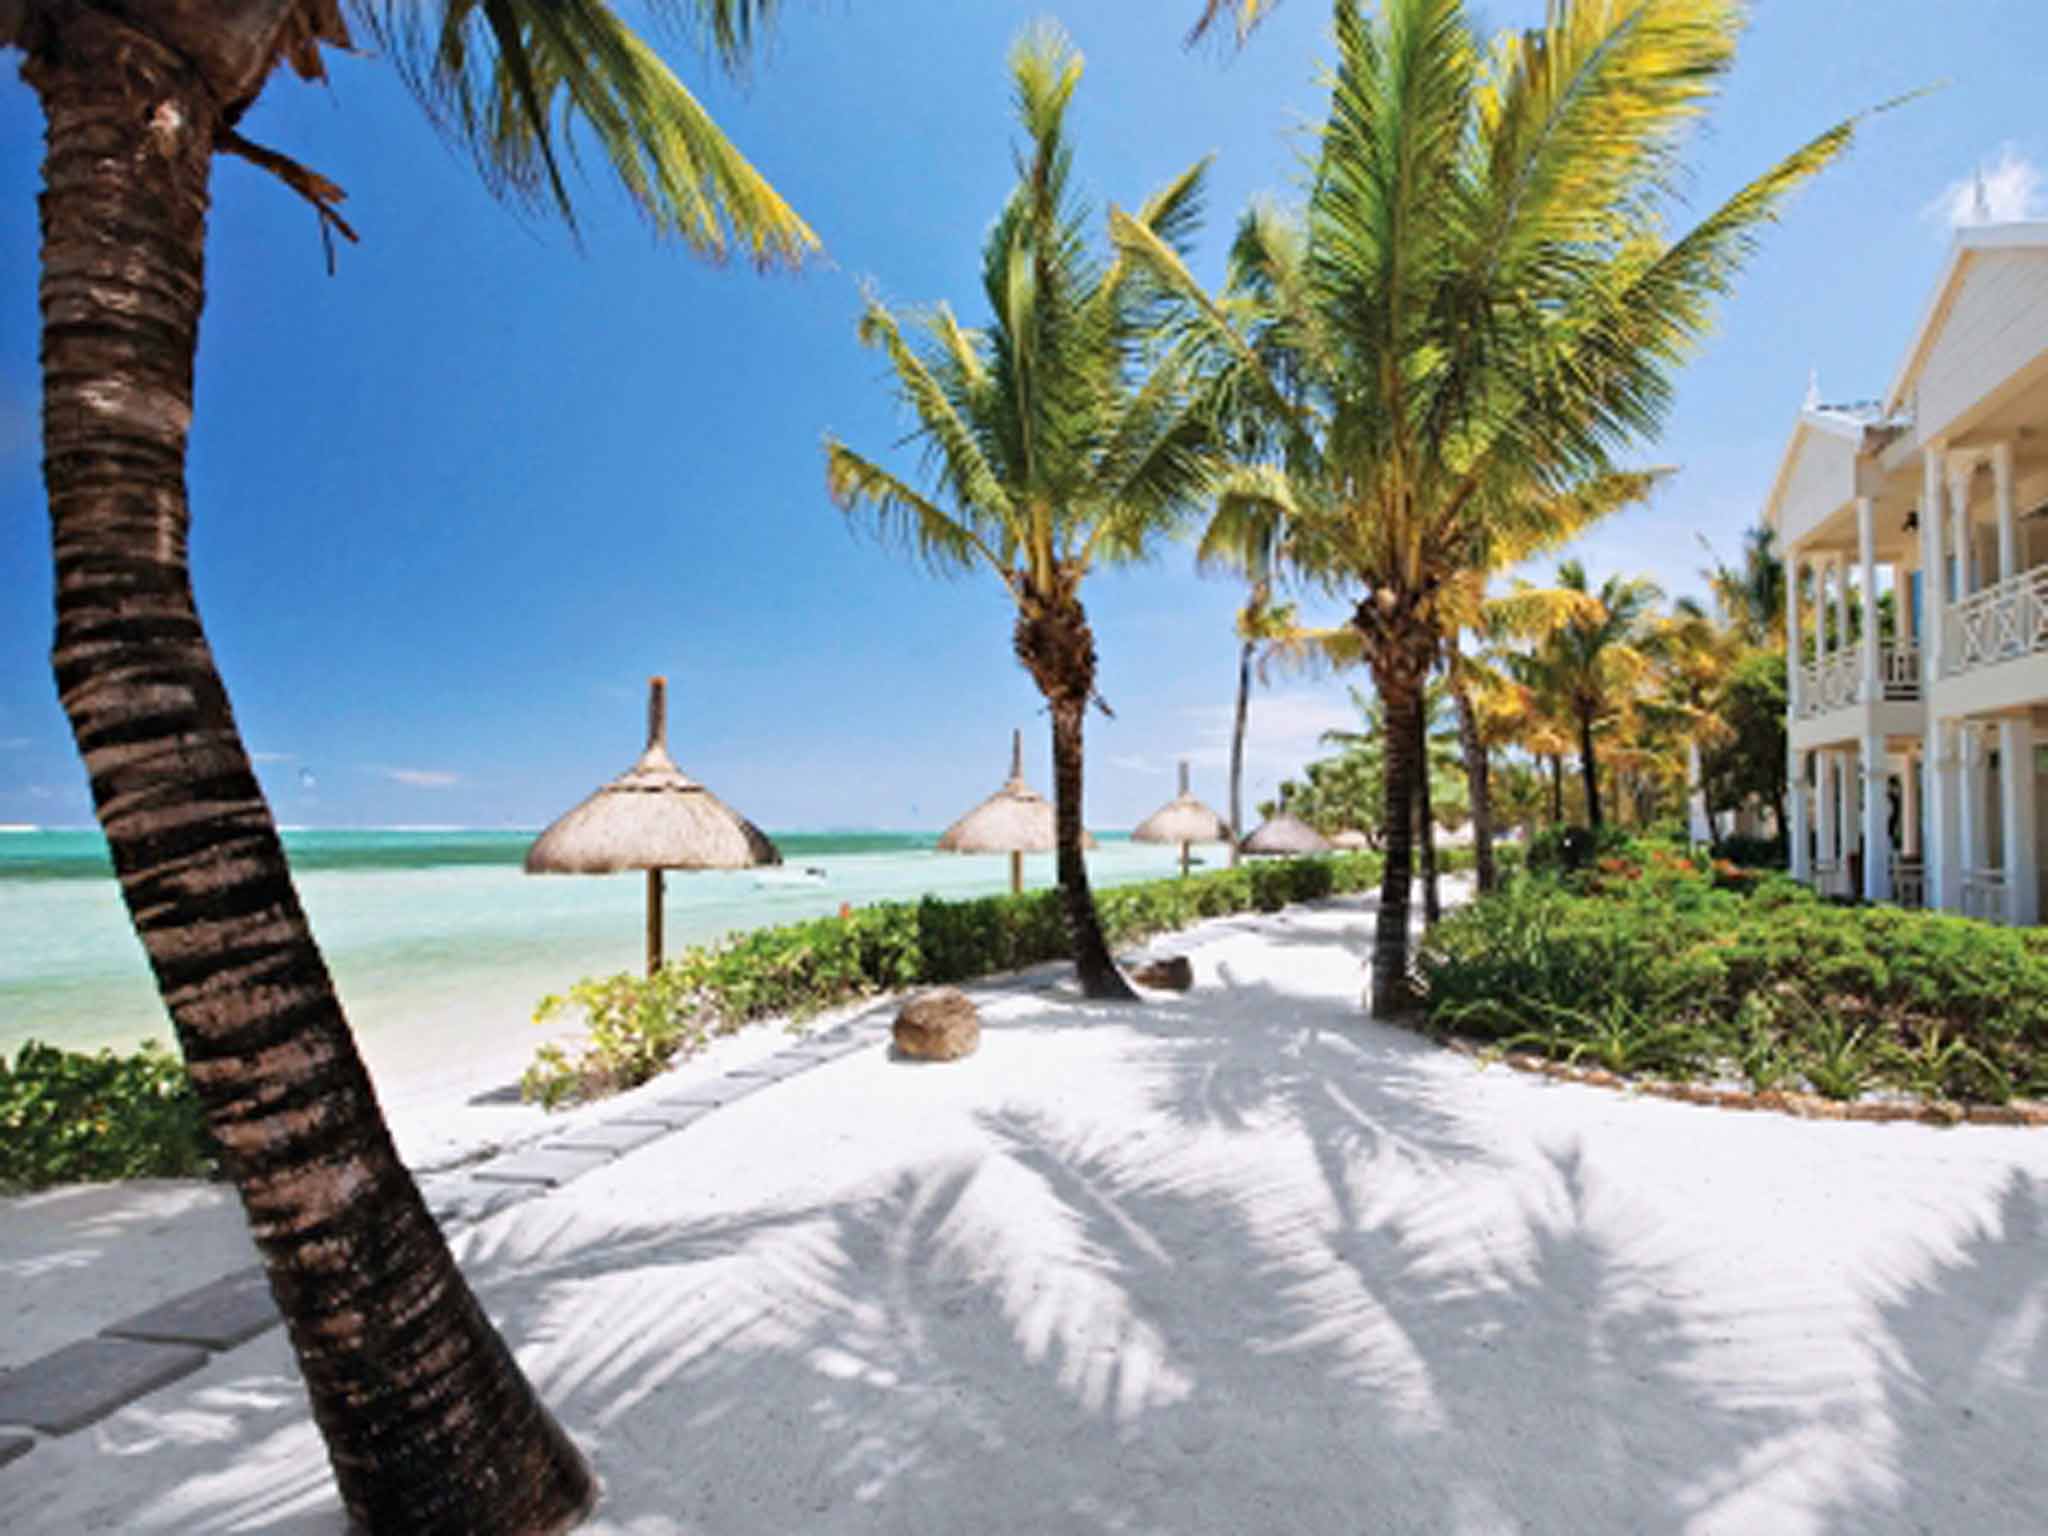 Beachy keen: head to Mauritius this October